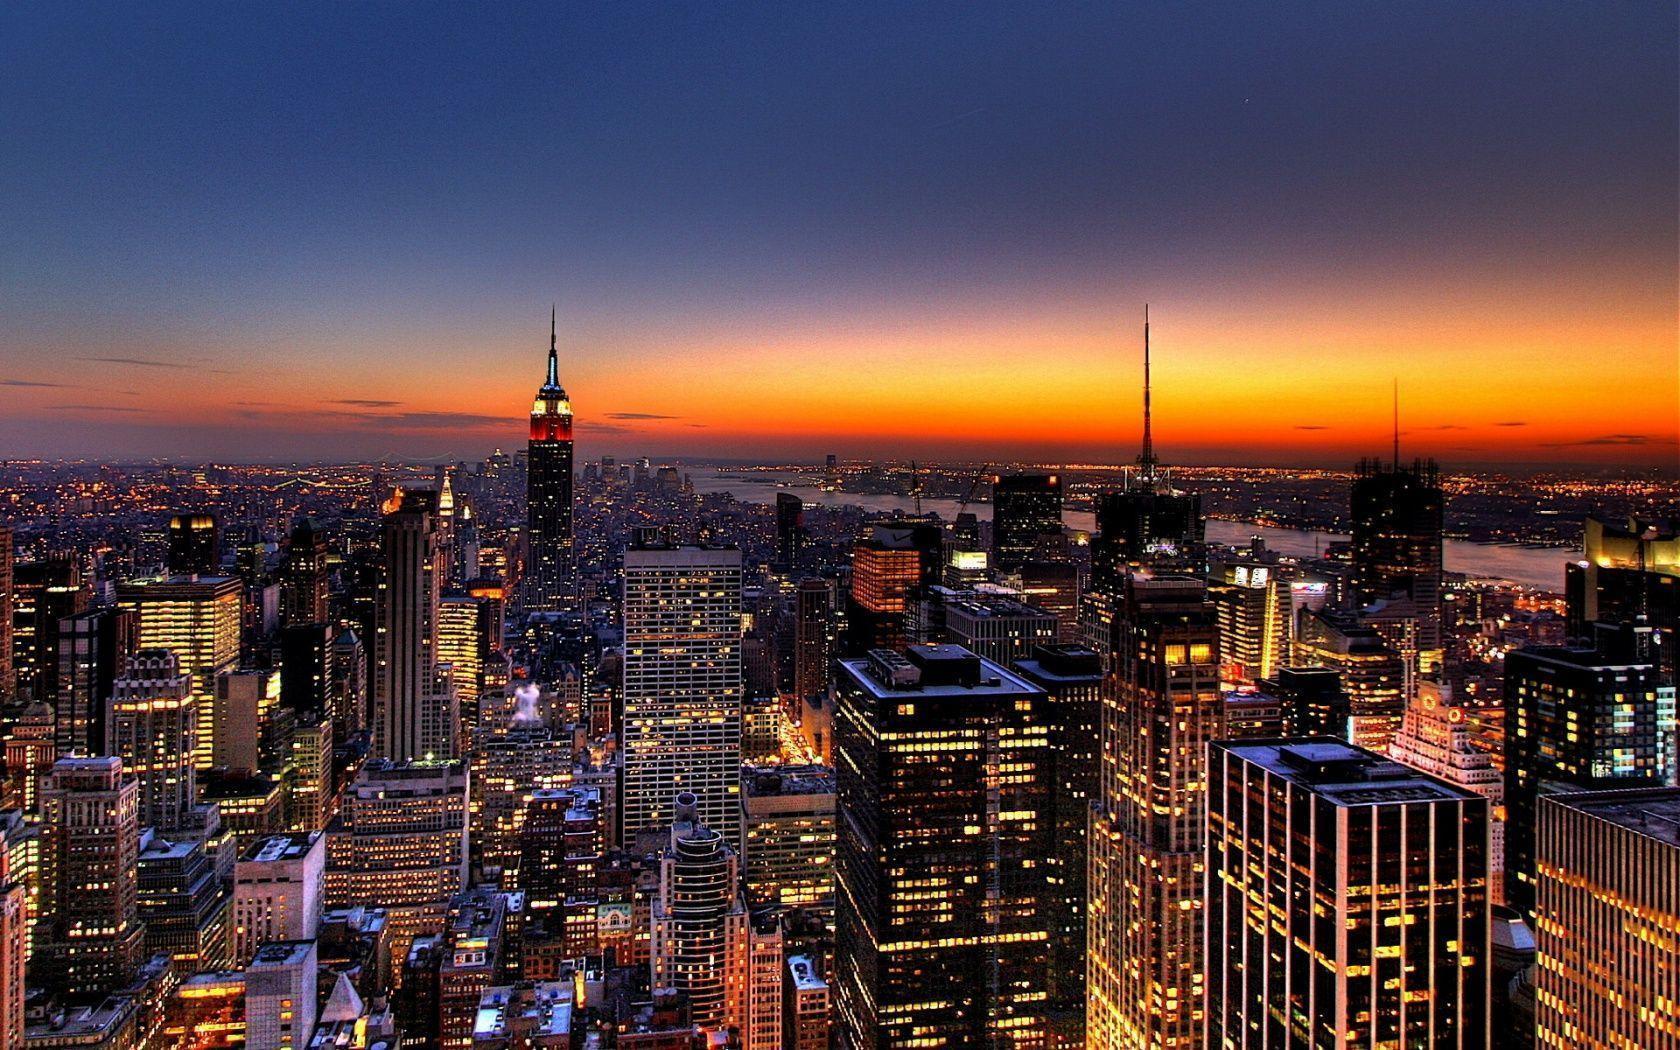 new york 1080p wallpapers – 1920×1080 High Definition Wallpapers